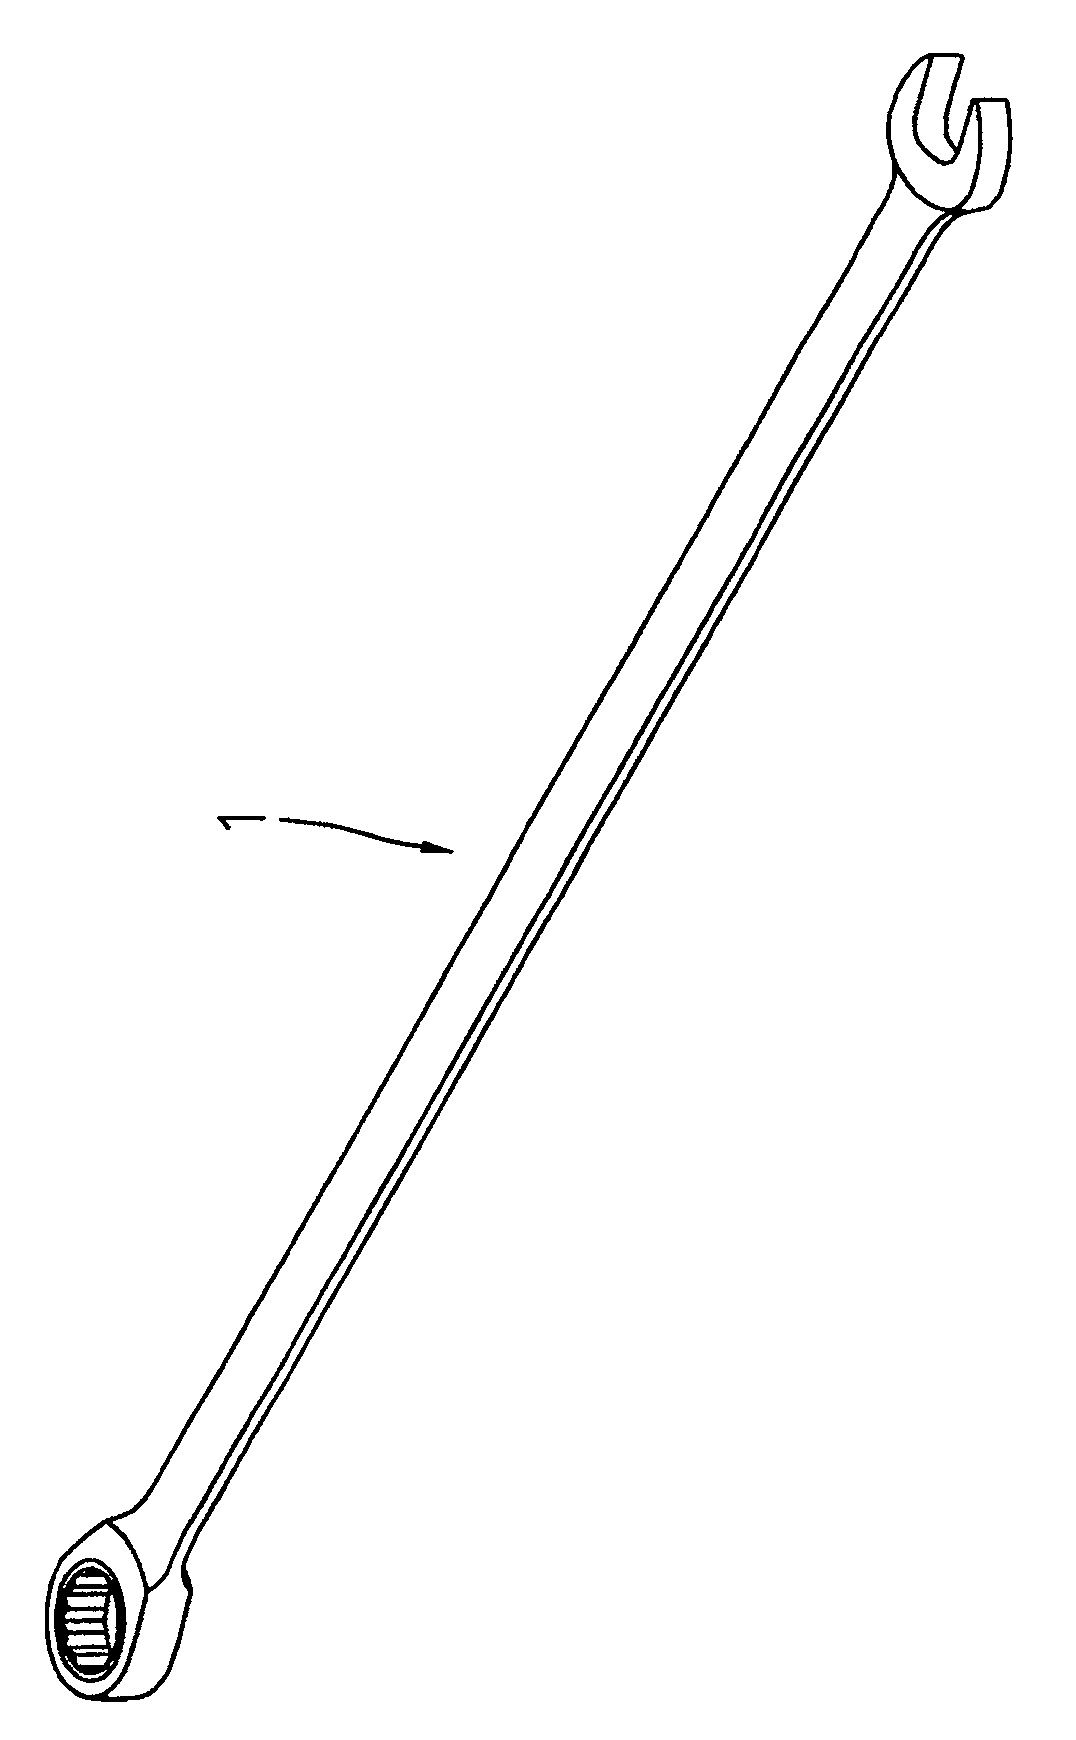 Lengthened type wrench joining structure